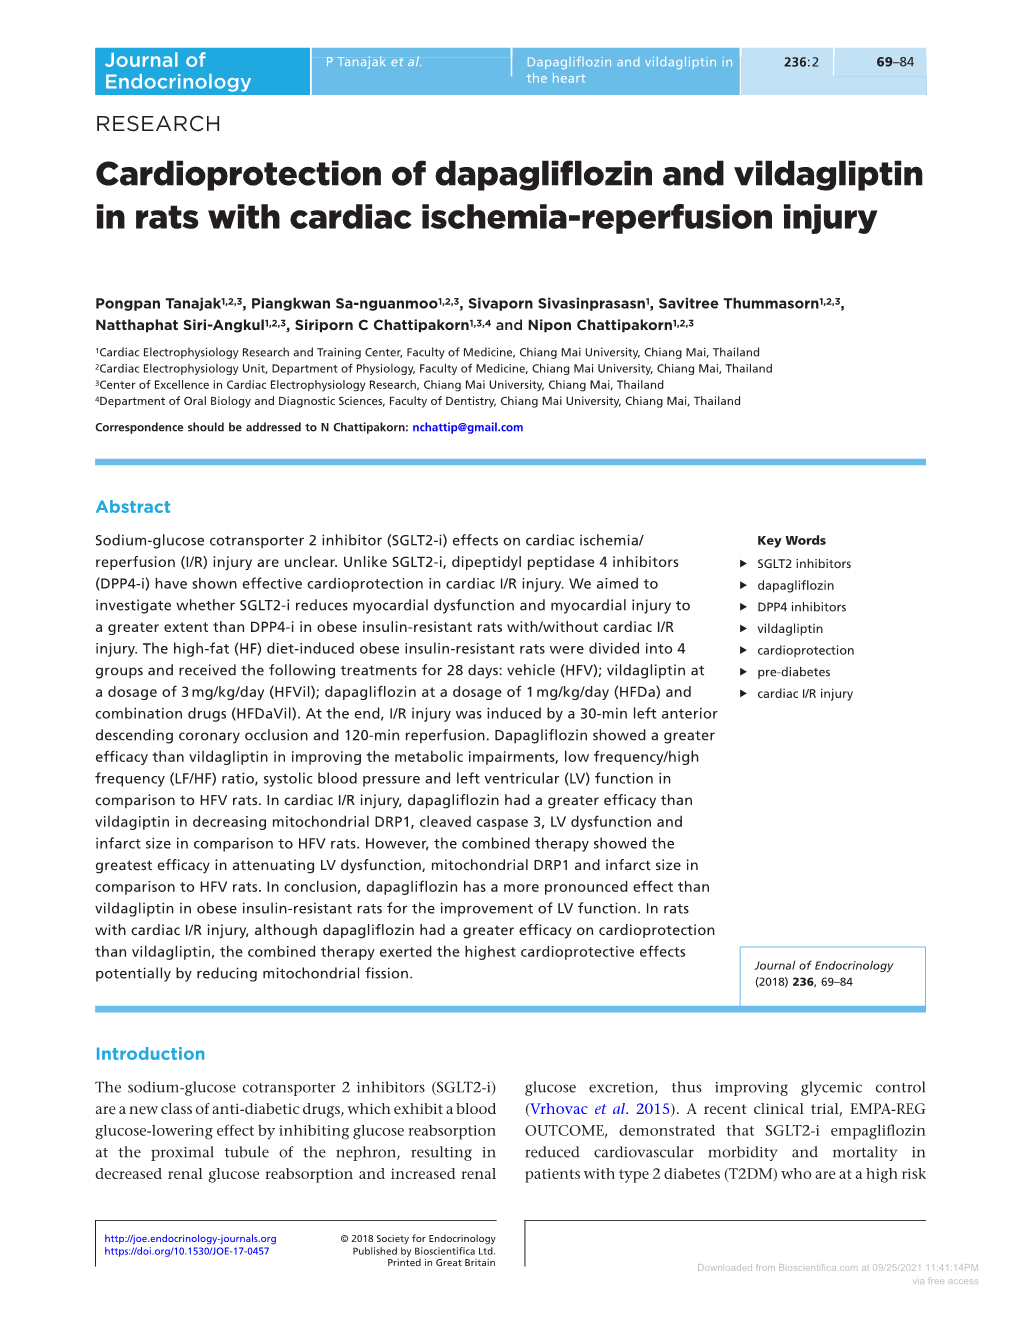 Cardioprotection of Dapagliflozin and Vildagliptin in Rats with Cardiac Ischemia-Reperfusion Injury